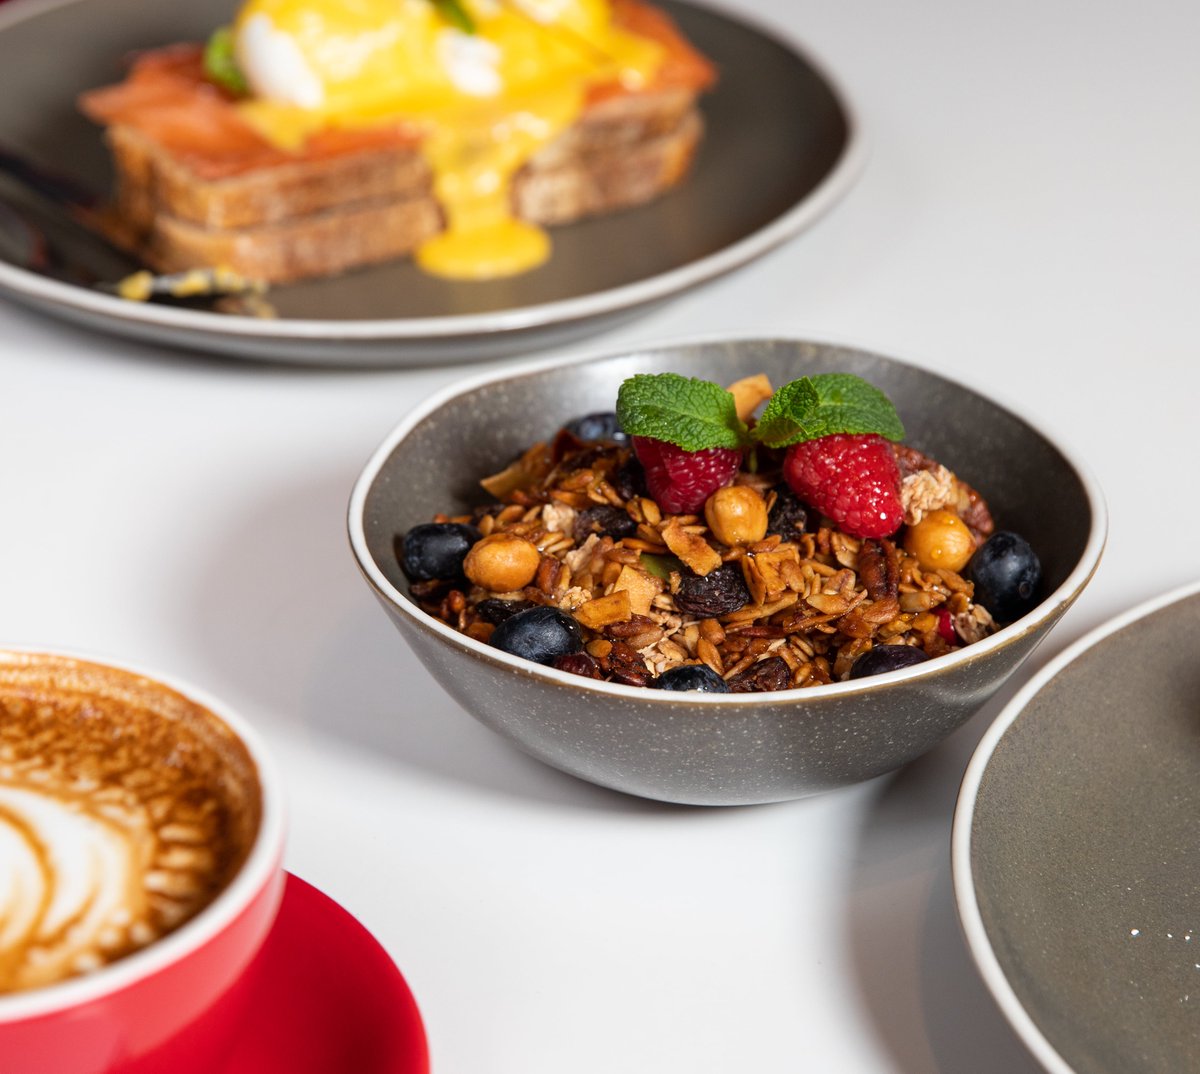 Our Quarter Granola is the perfect way to kickstart your day with a protein-packed crunch 💪 #londonbrunch #london #londonfood